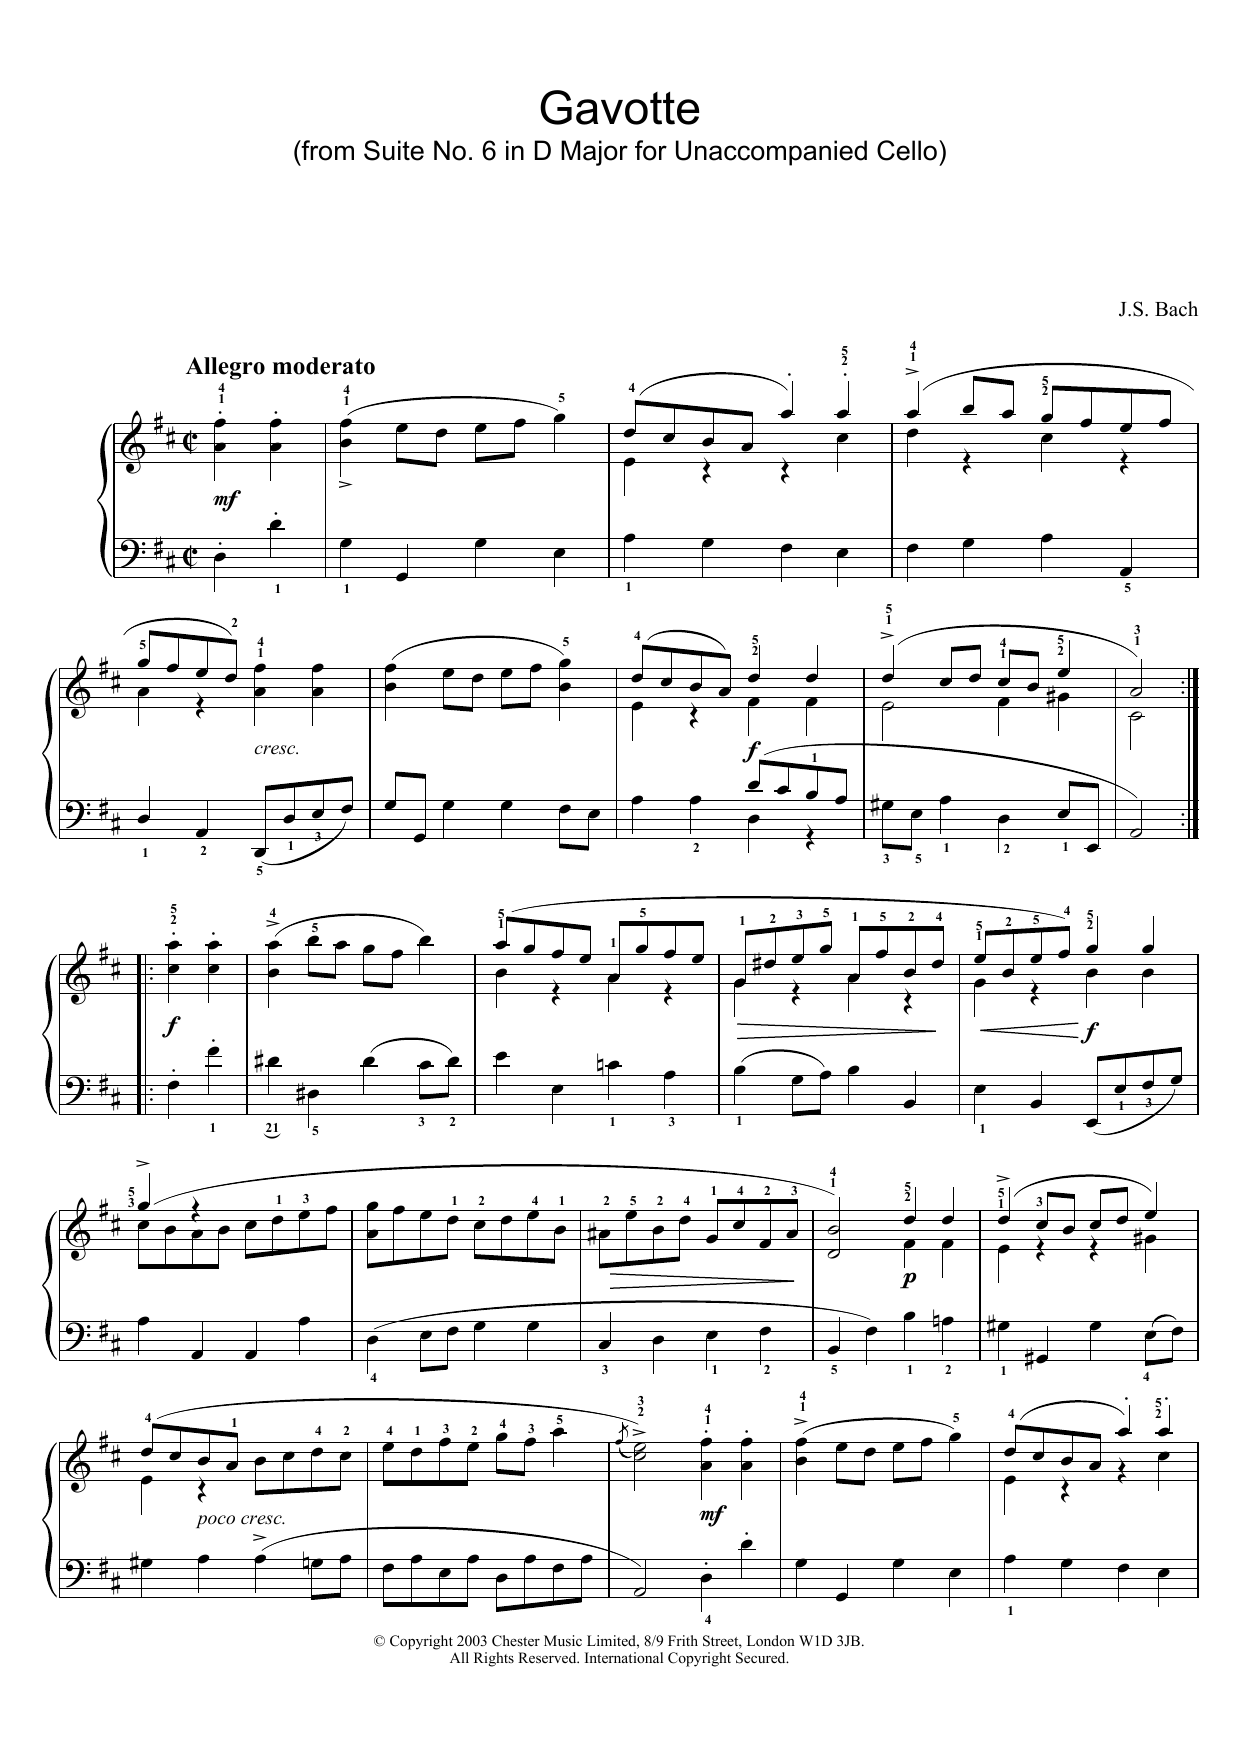 J.S. Bach Gavotte (from Suite No. 6 in D Major for Unaccompanied Cello) sheet music preview music notes and score for Piano including 2 page(s)